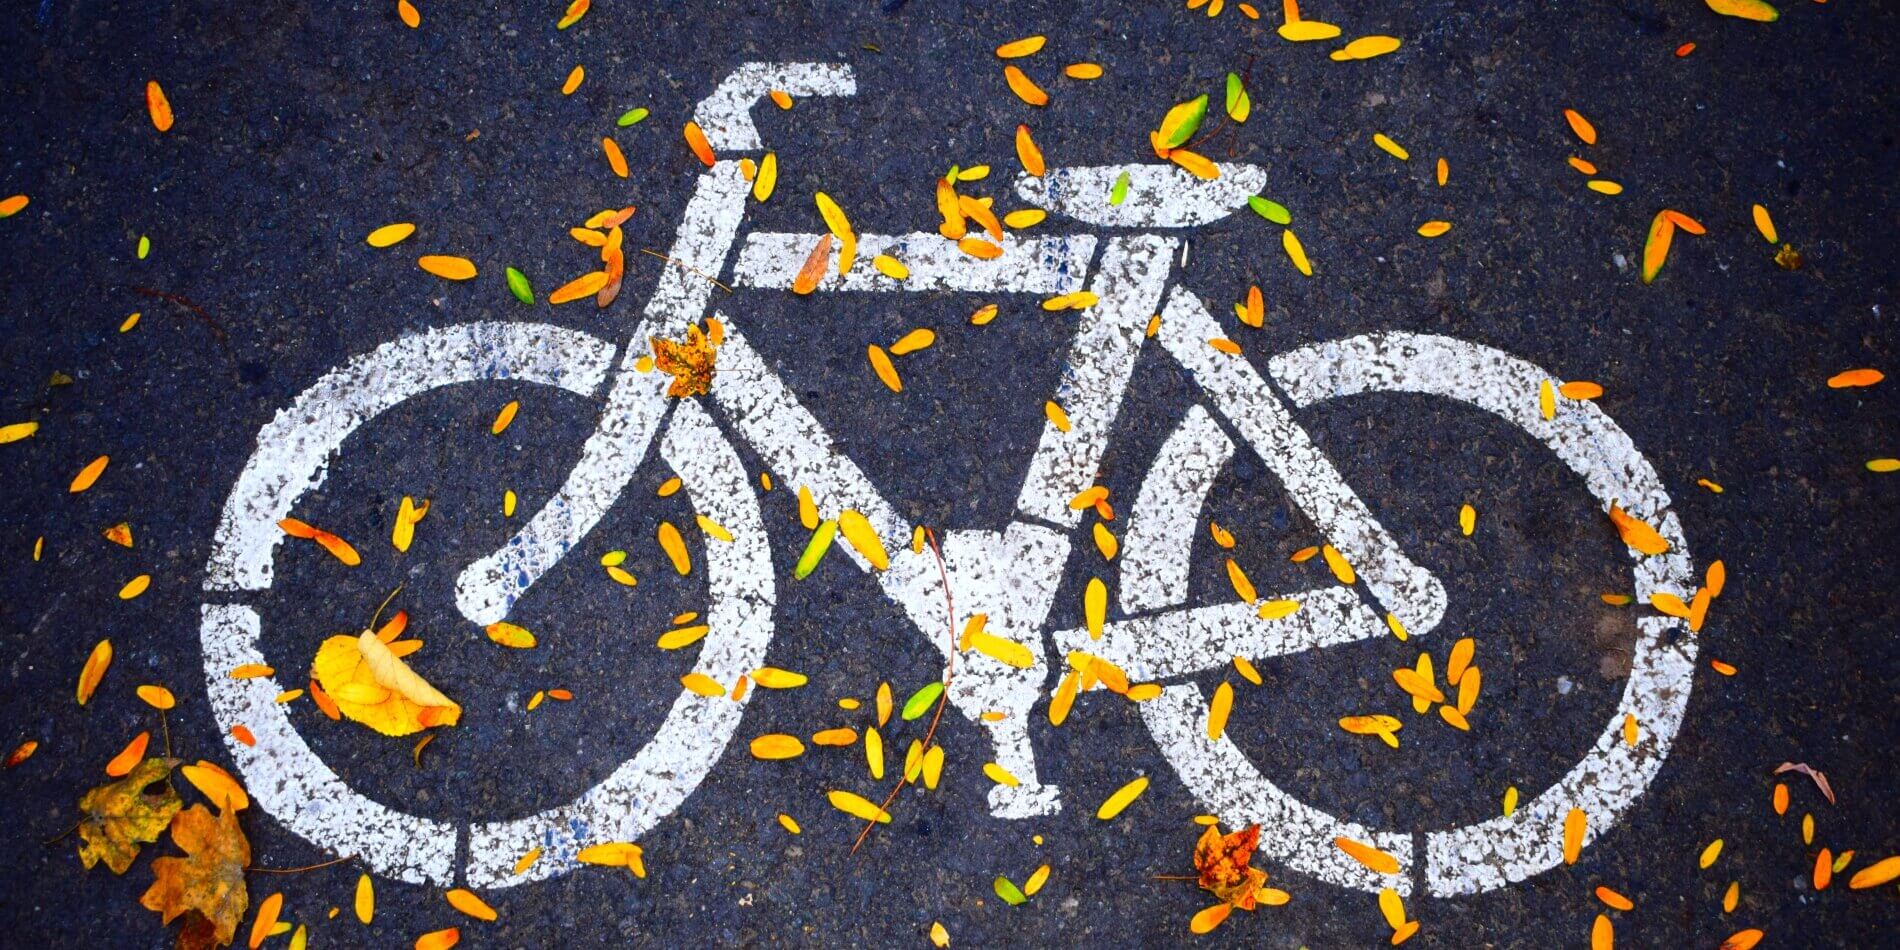 White bicycle symbol painted on a bitumen road with autumn leaves partially covering the road.